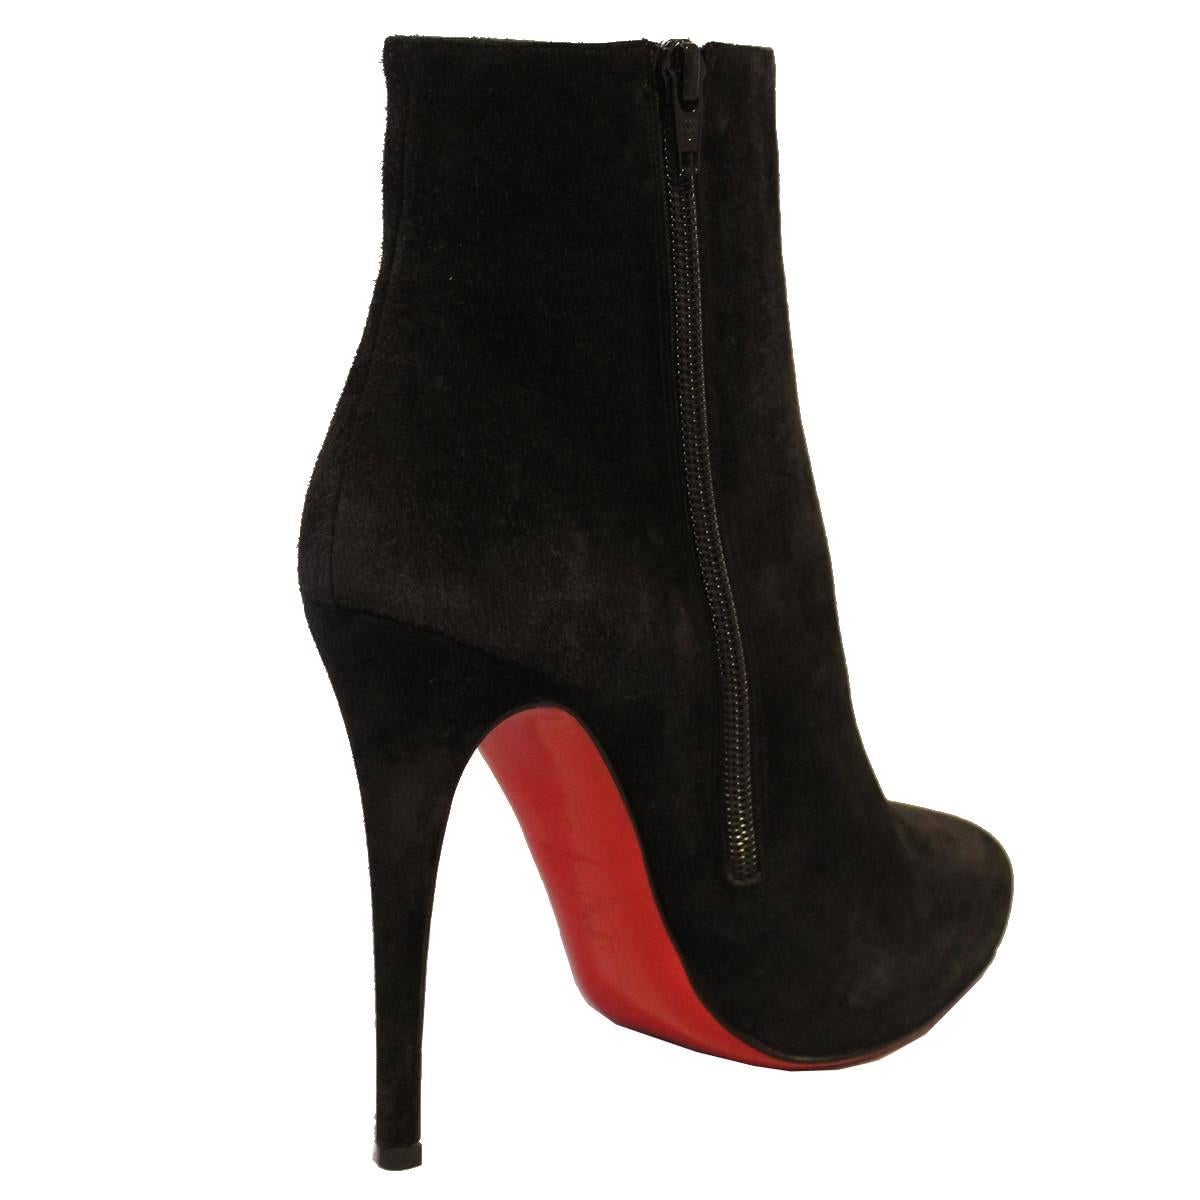 Fantastic and almost new Louboutin's ankle boots
Buckskin
Black color
Used once
Heel height cm 12 (4.72 inches)
Size: 39 1/2
Made in Italy
Worldwide express shipping included in the price !